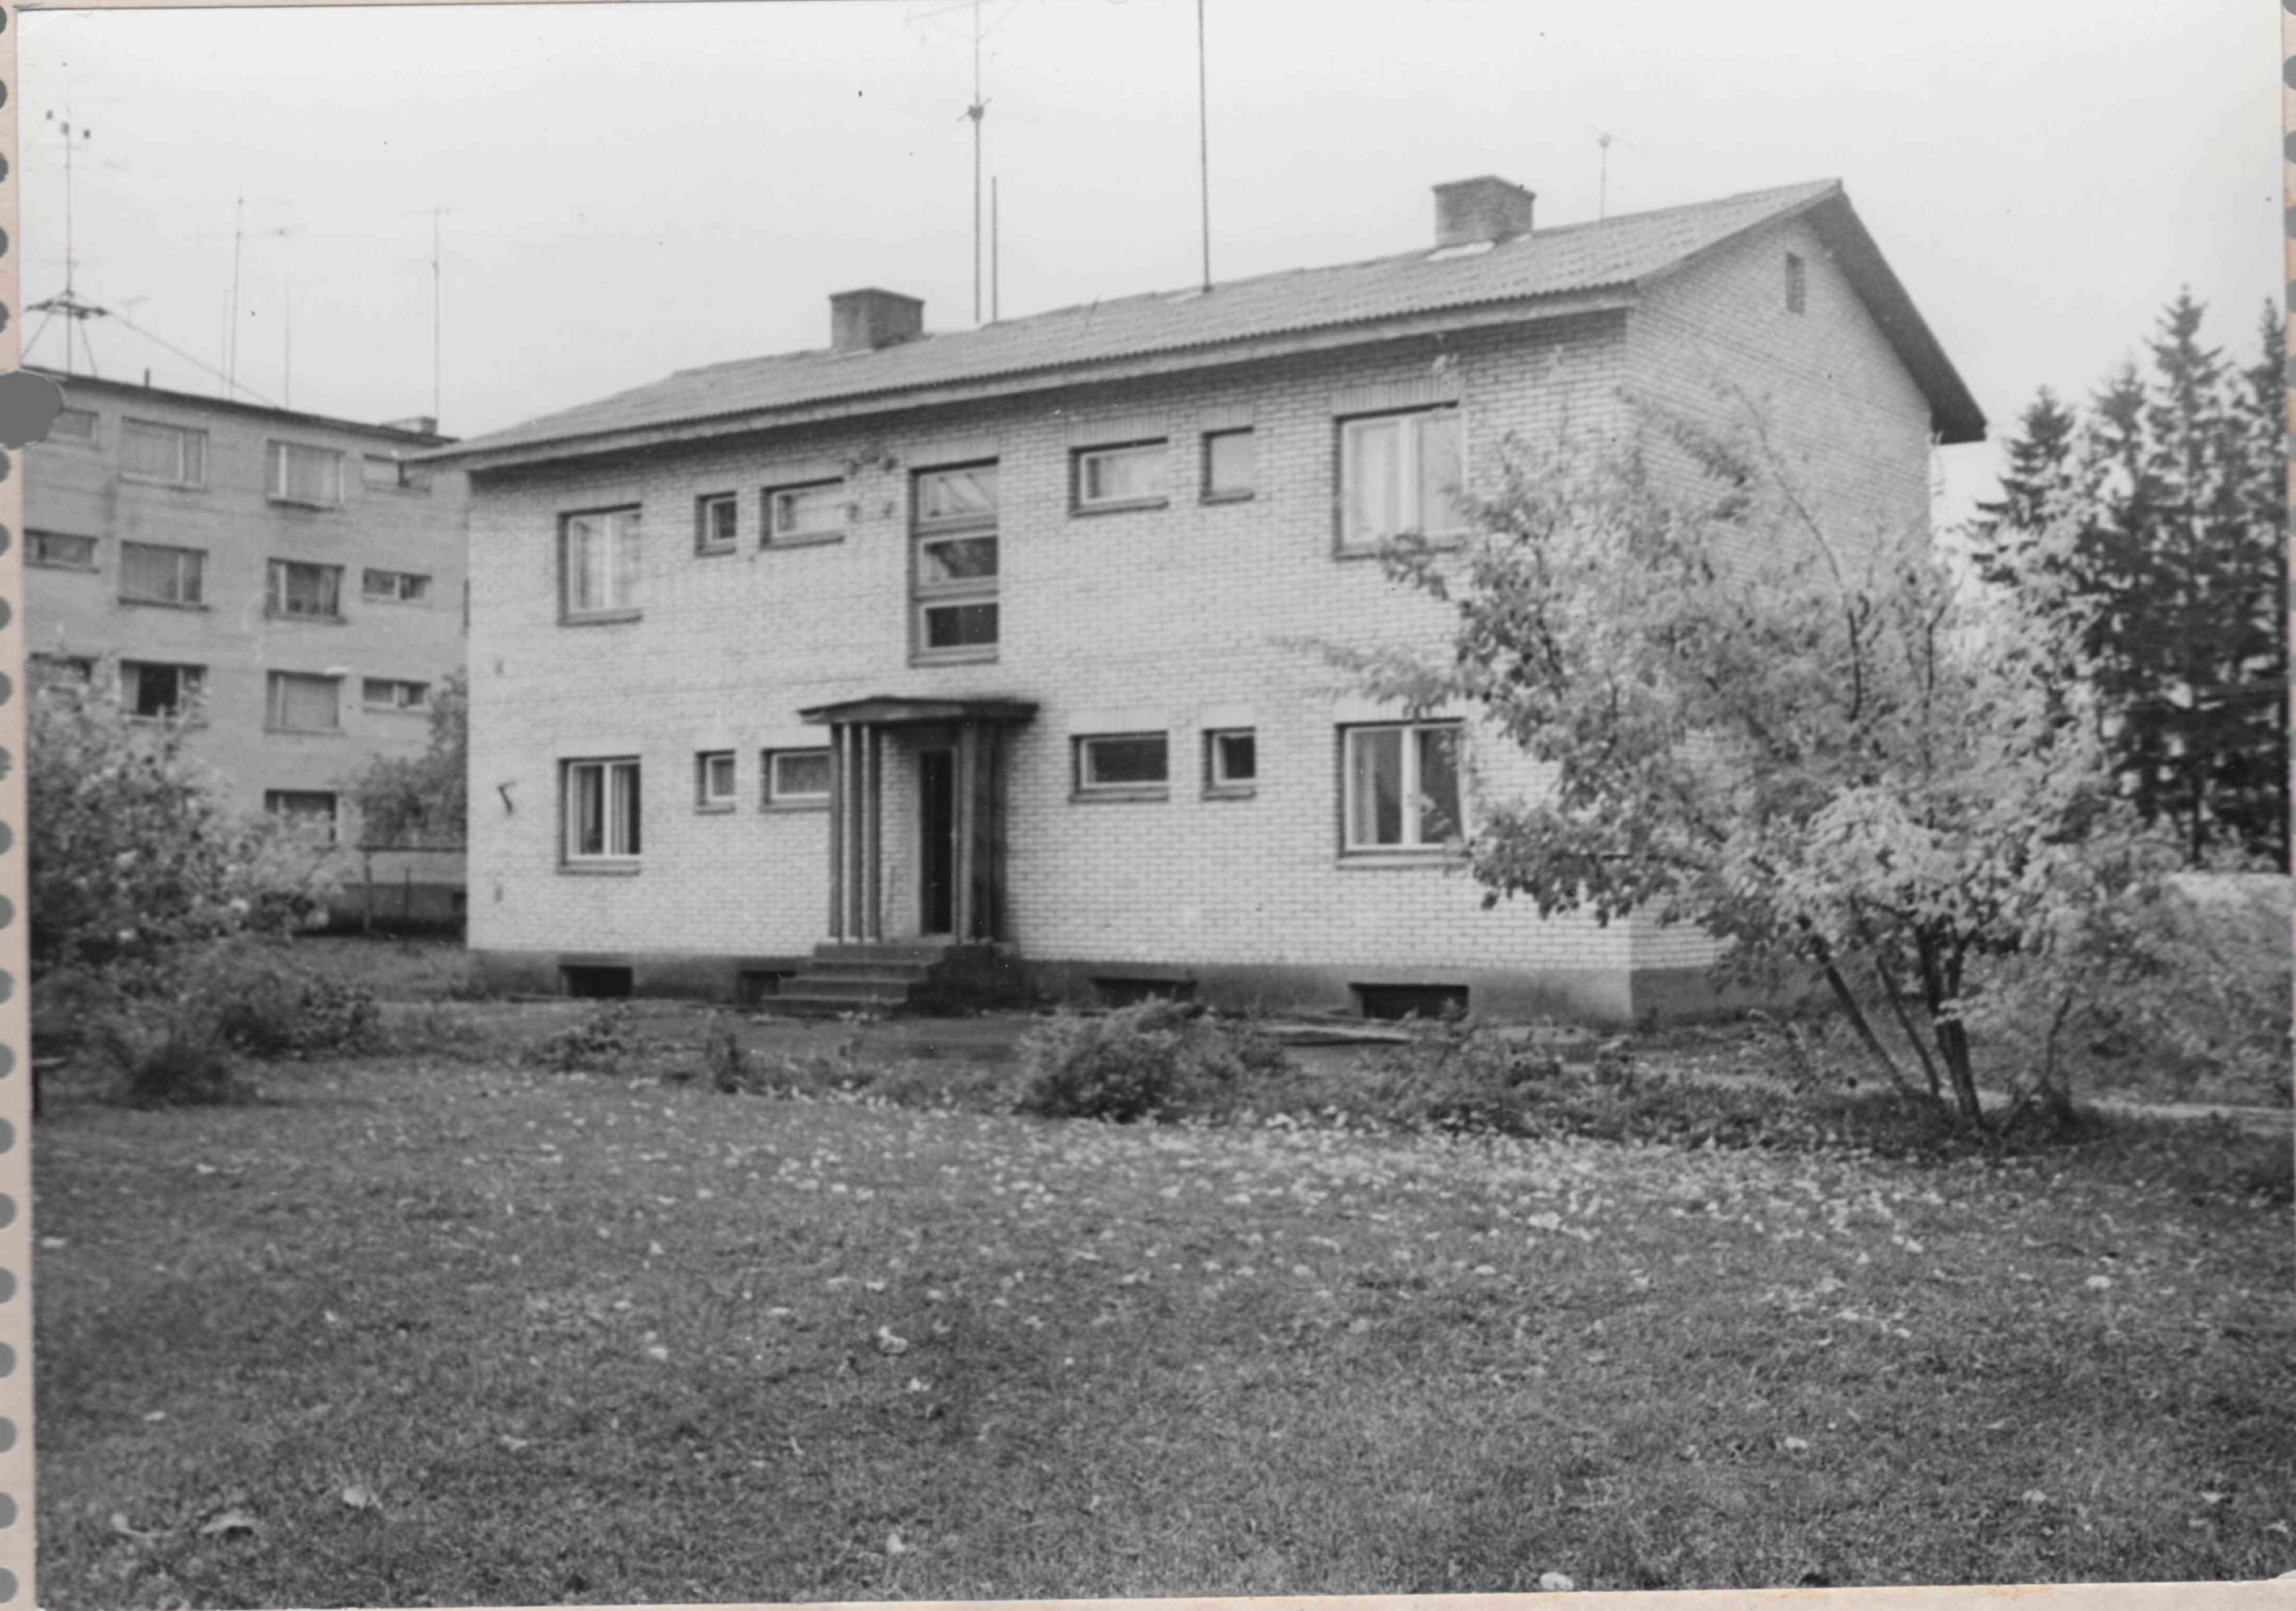 First stone houses, built 1962-1964